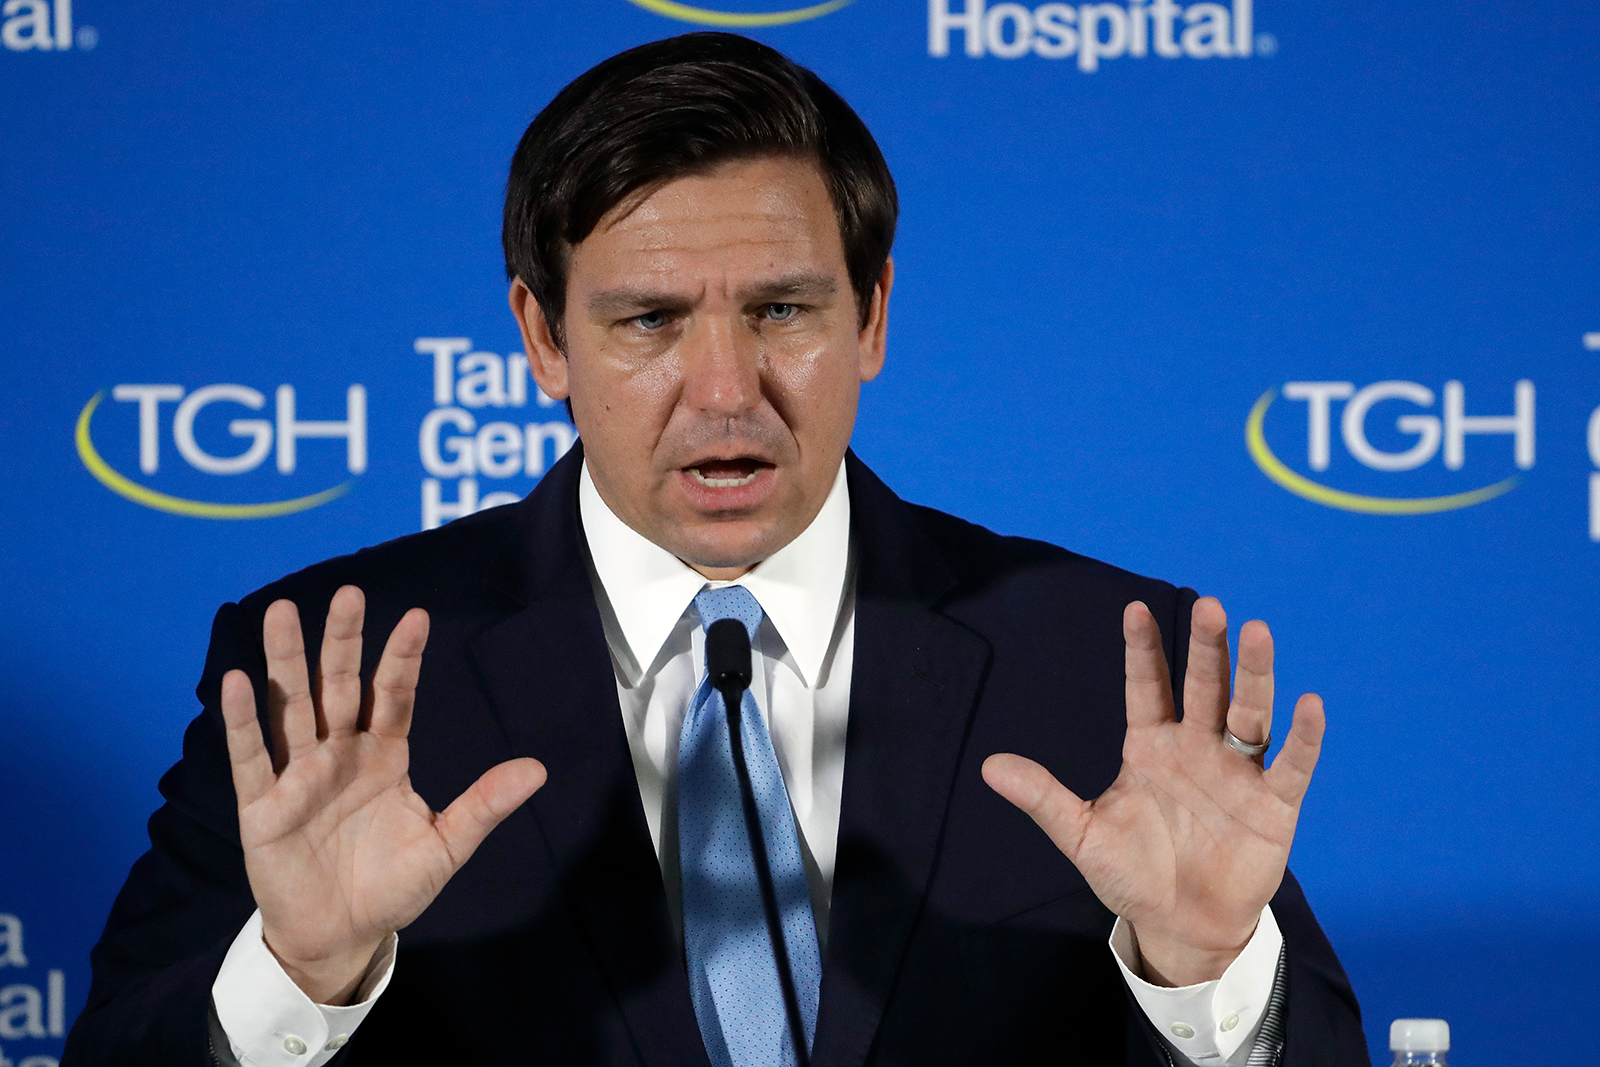 Florida Gov. Ron DeSantis gestures during a Covid-19 news conference on April 27, at the Tampa General Hospital in Tampa, Florida.